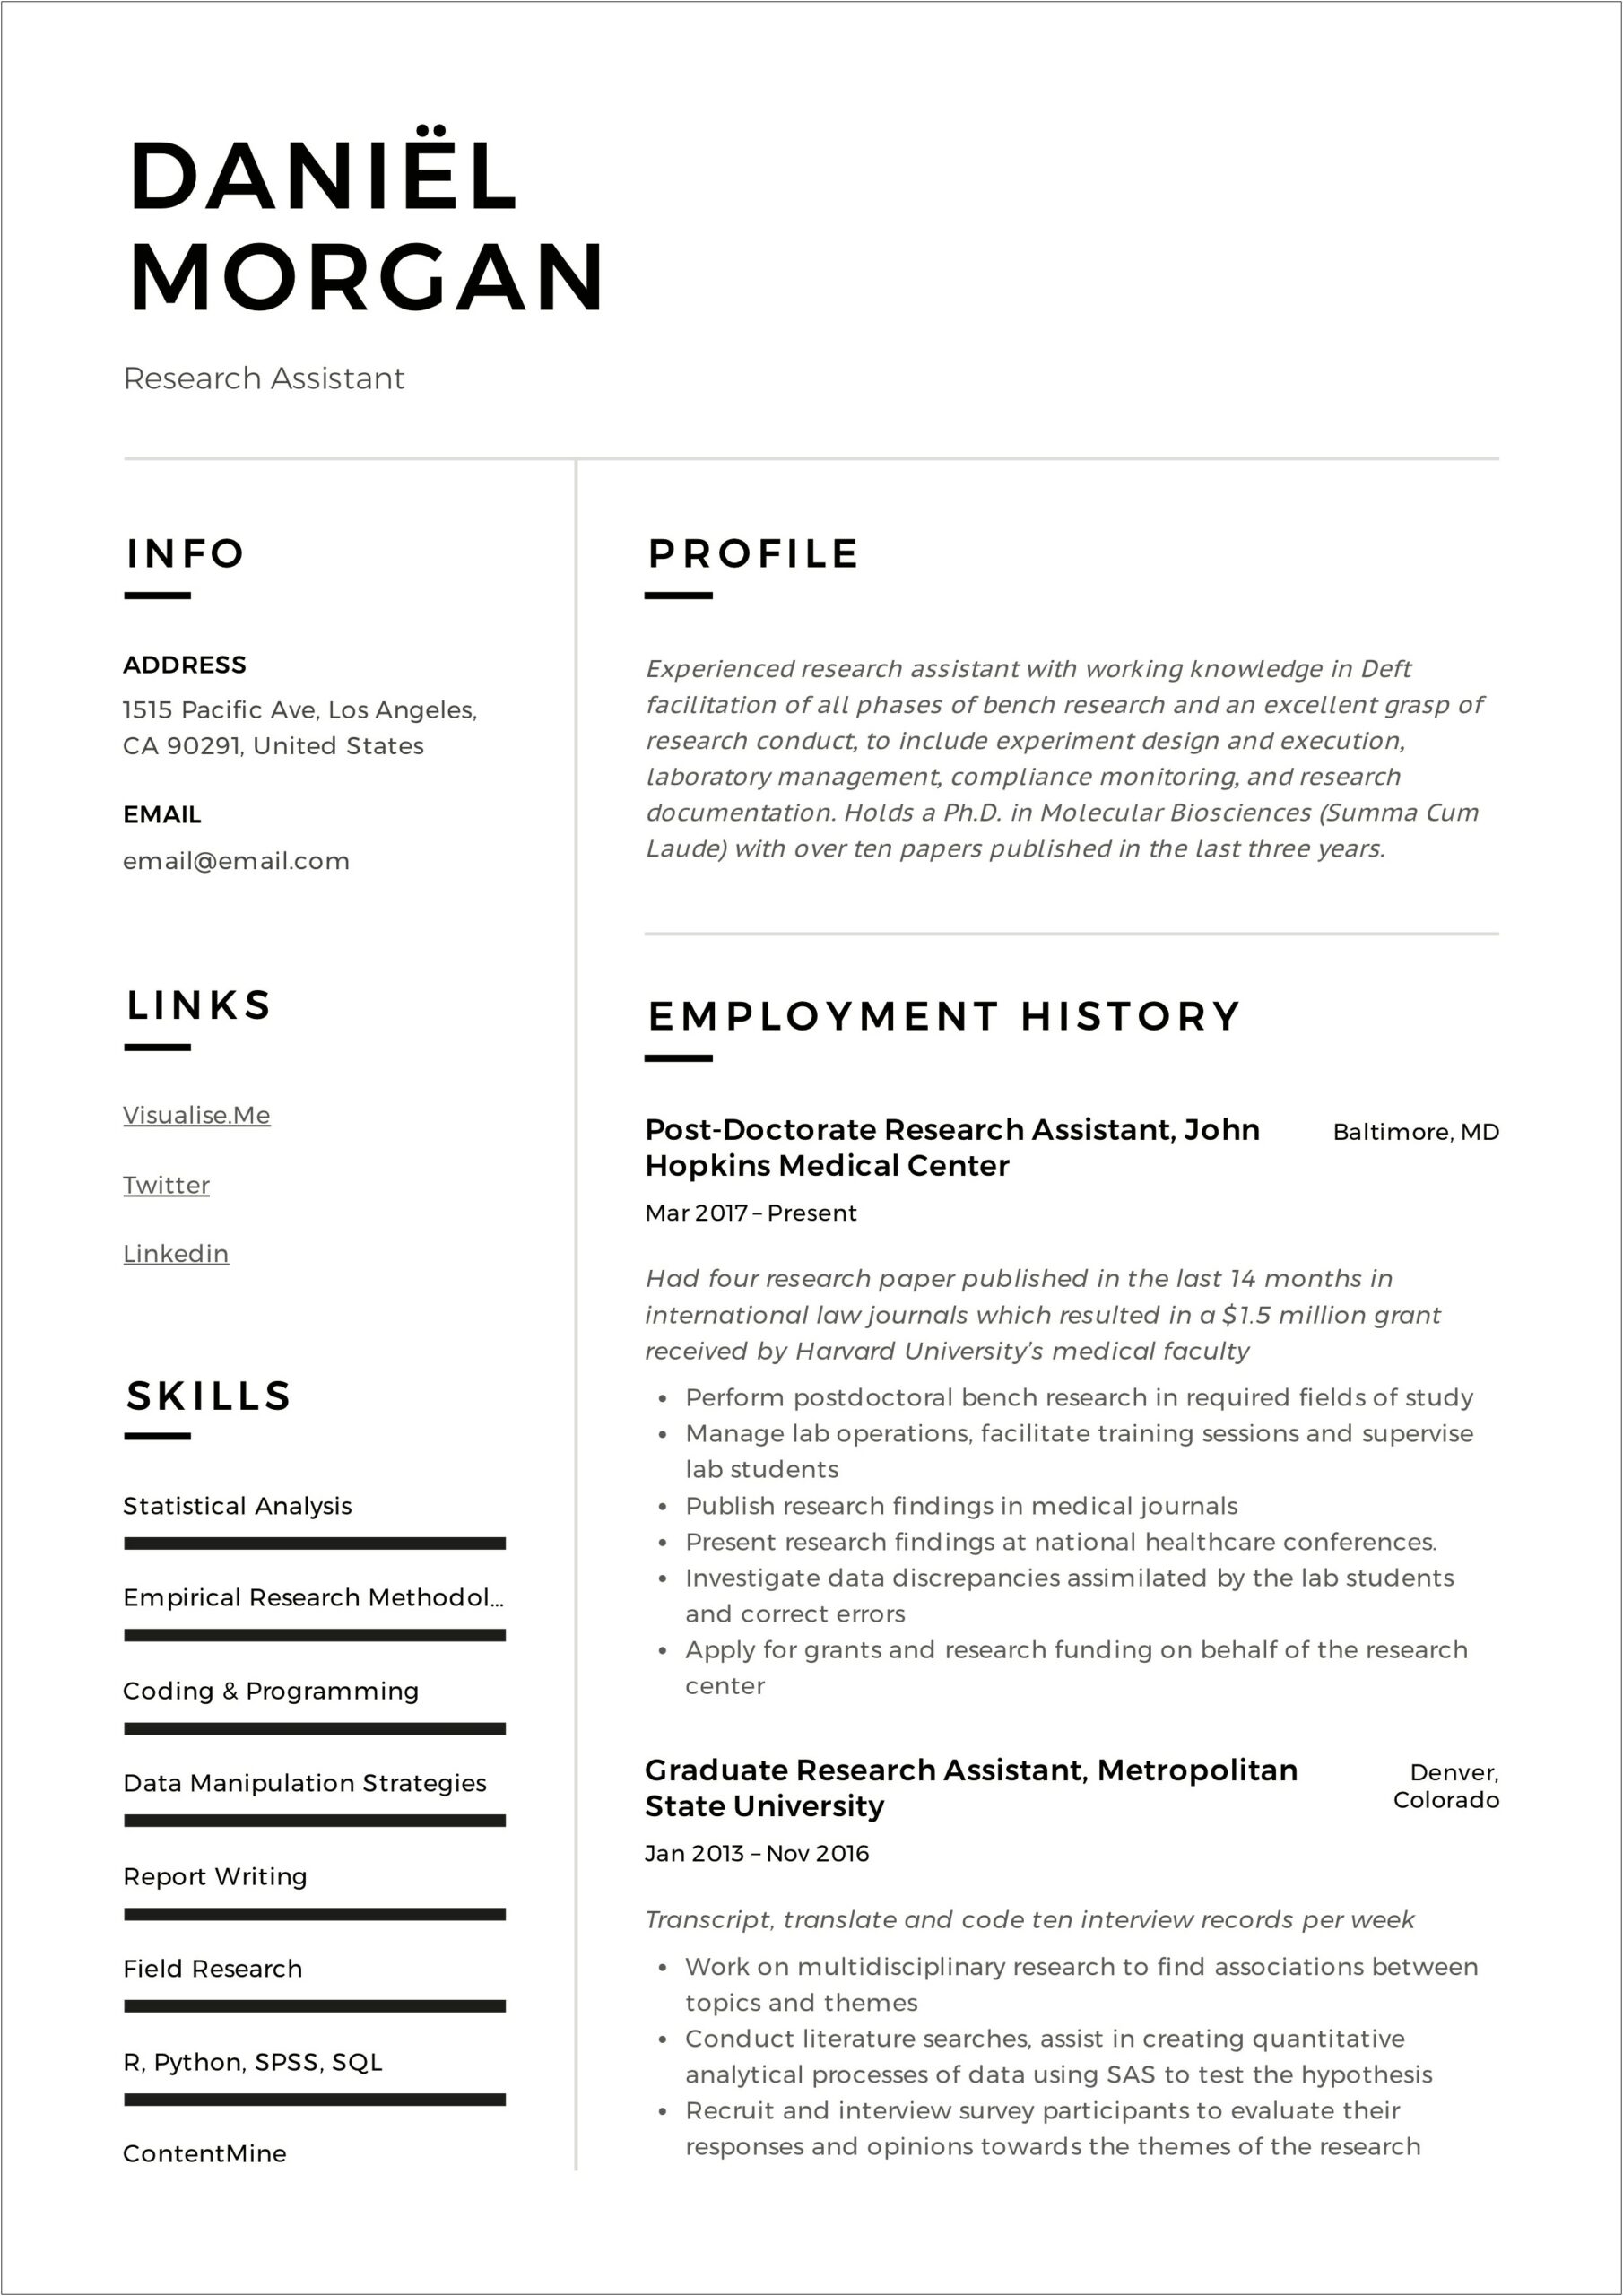 Clinical Research Assistant Resume Samples